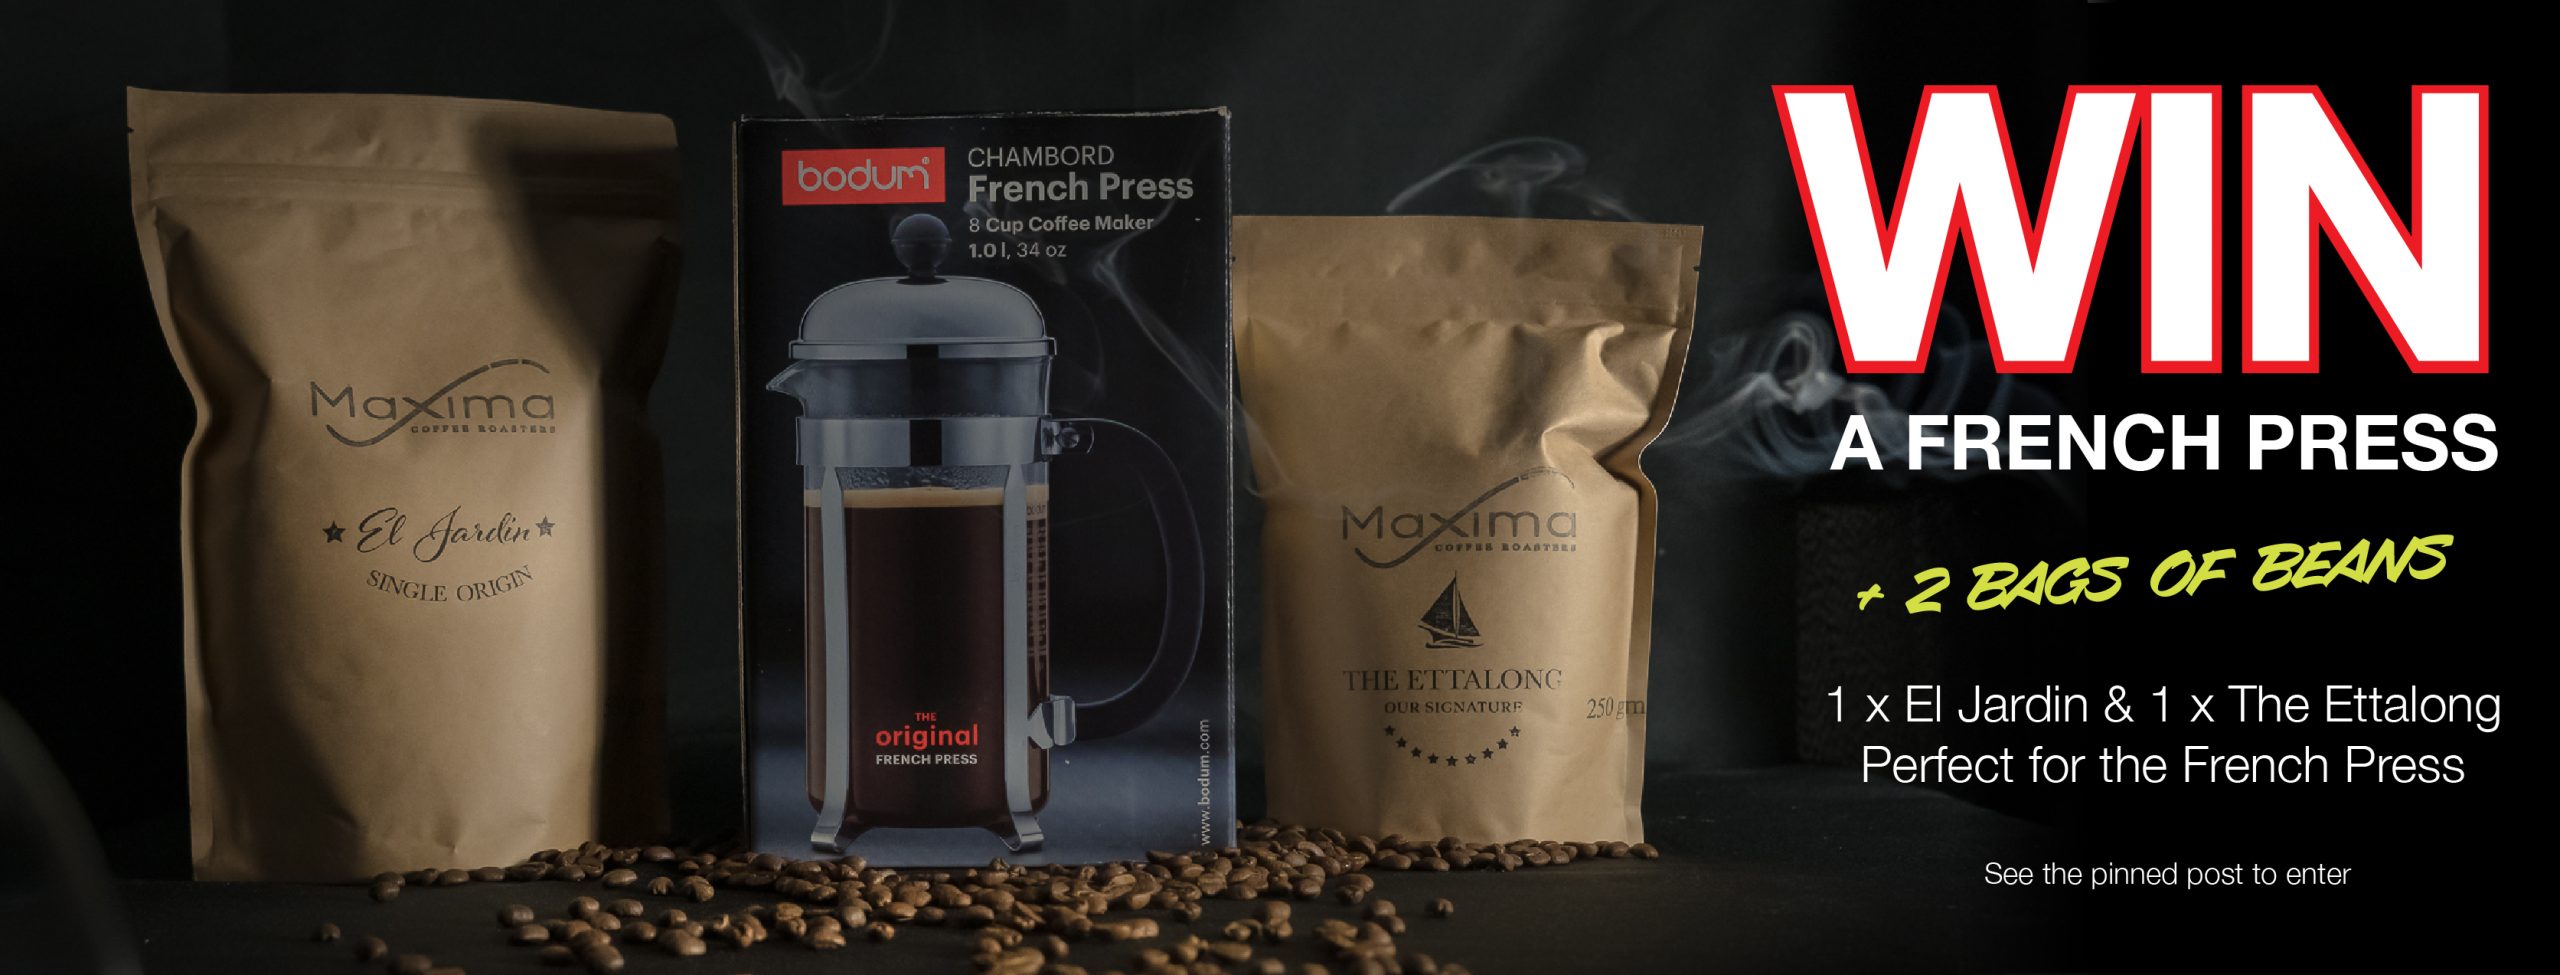 Win a french press with maxima coffee roasters